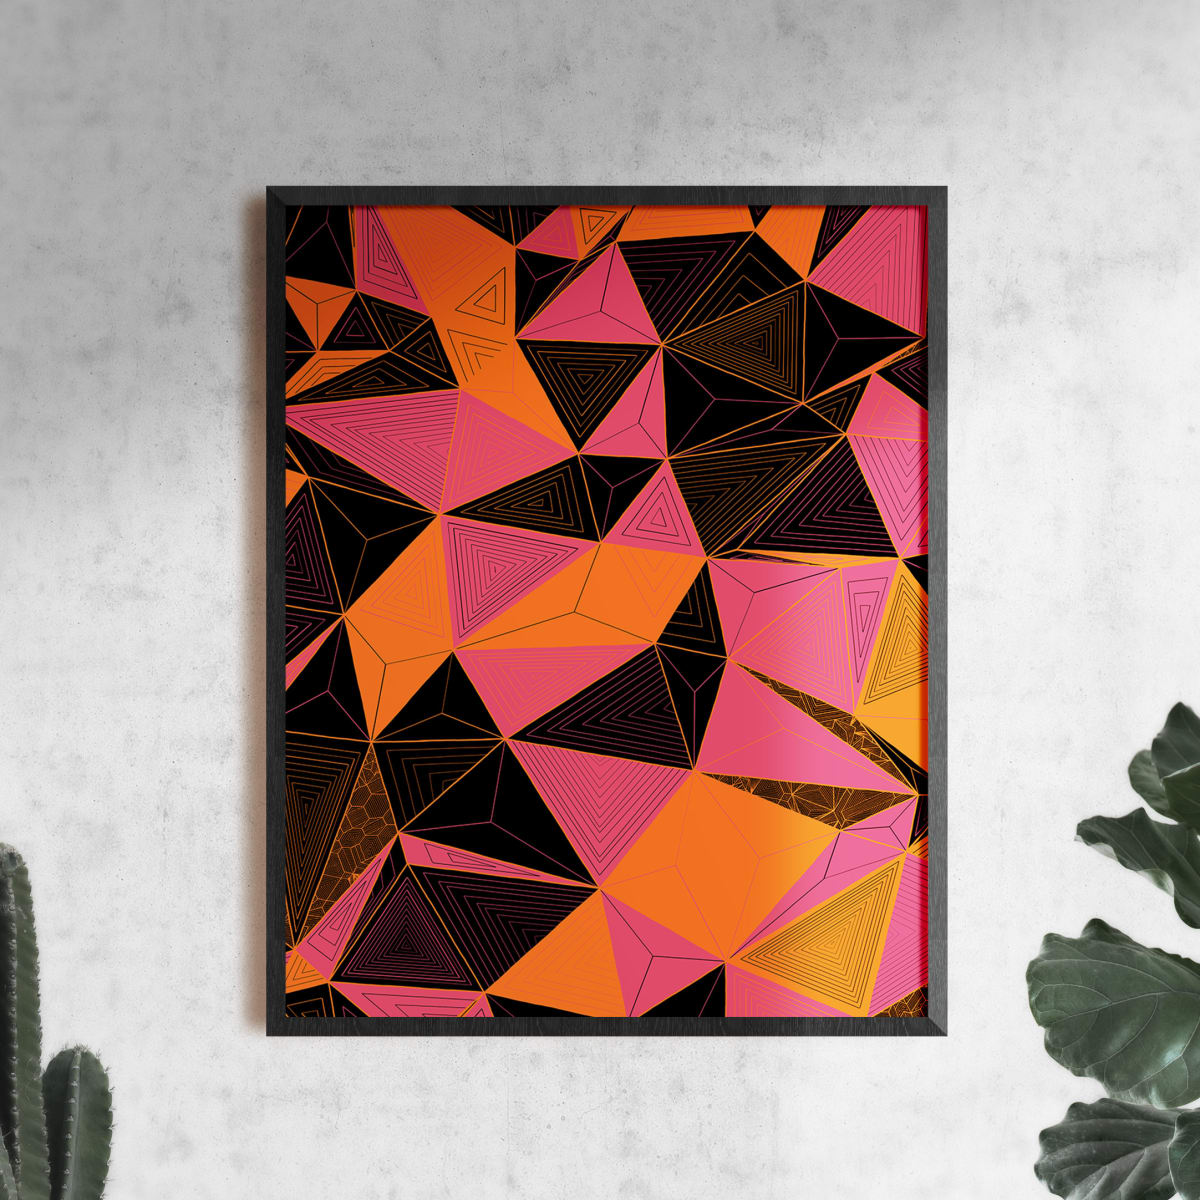 "Conscious Growth 078" Large One-of-a-Kind Print by Debbie Clapper  Image: Conscious Growth Print 078, a pink, orange, black and white one of a kind archival modern art print